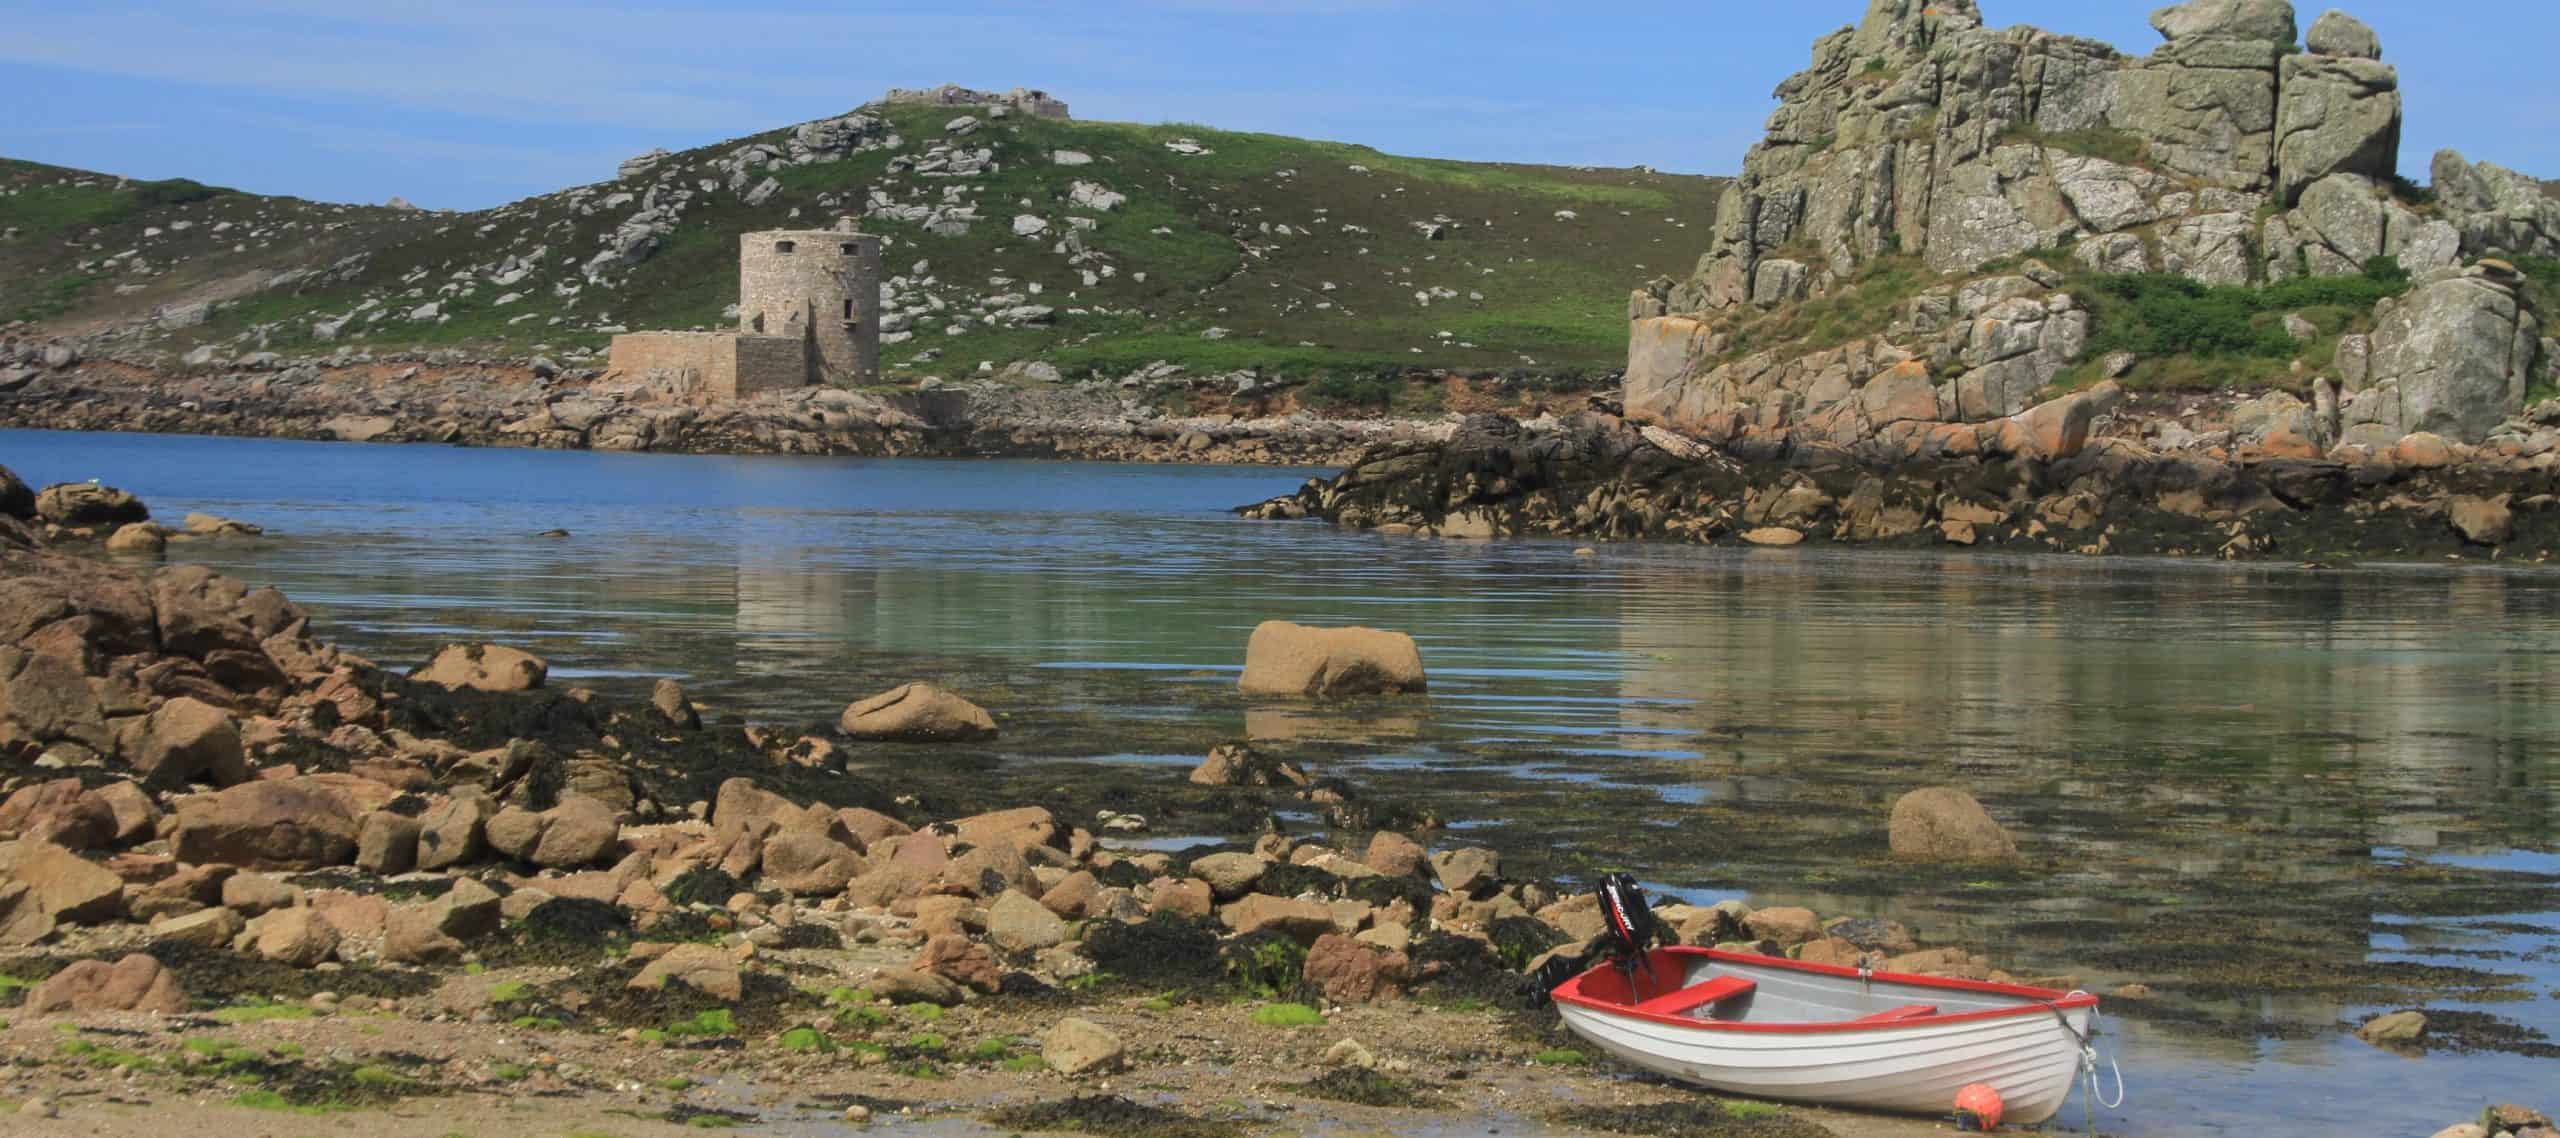 Explore the beautiful Isles of Scilly after the school holidays and relax on the Grayhound lugger